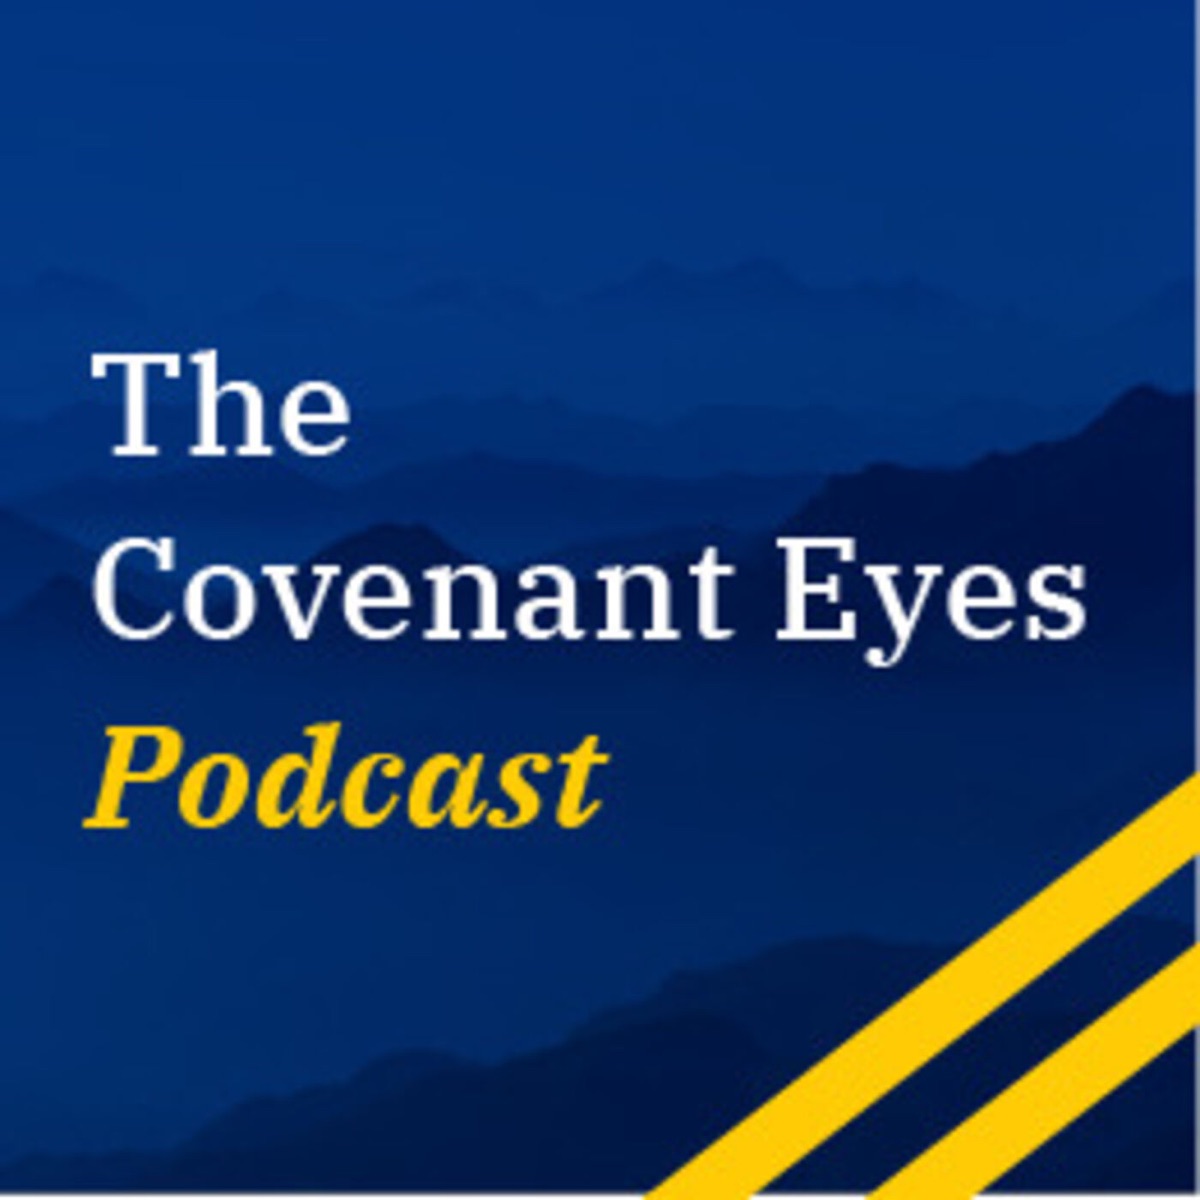 Yolanda Clark Porn - Restored Vows: A Porn Recovery Series for Couples with Brandon and Tonia  Clark â€“ The Covenant Eyes Podcast â€“ Podcast â€“ Podtail